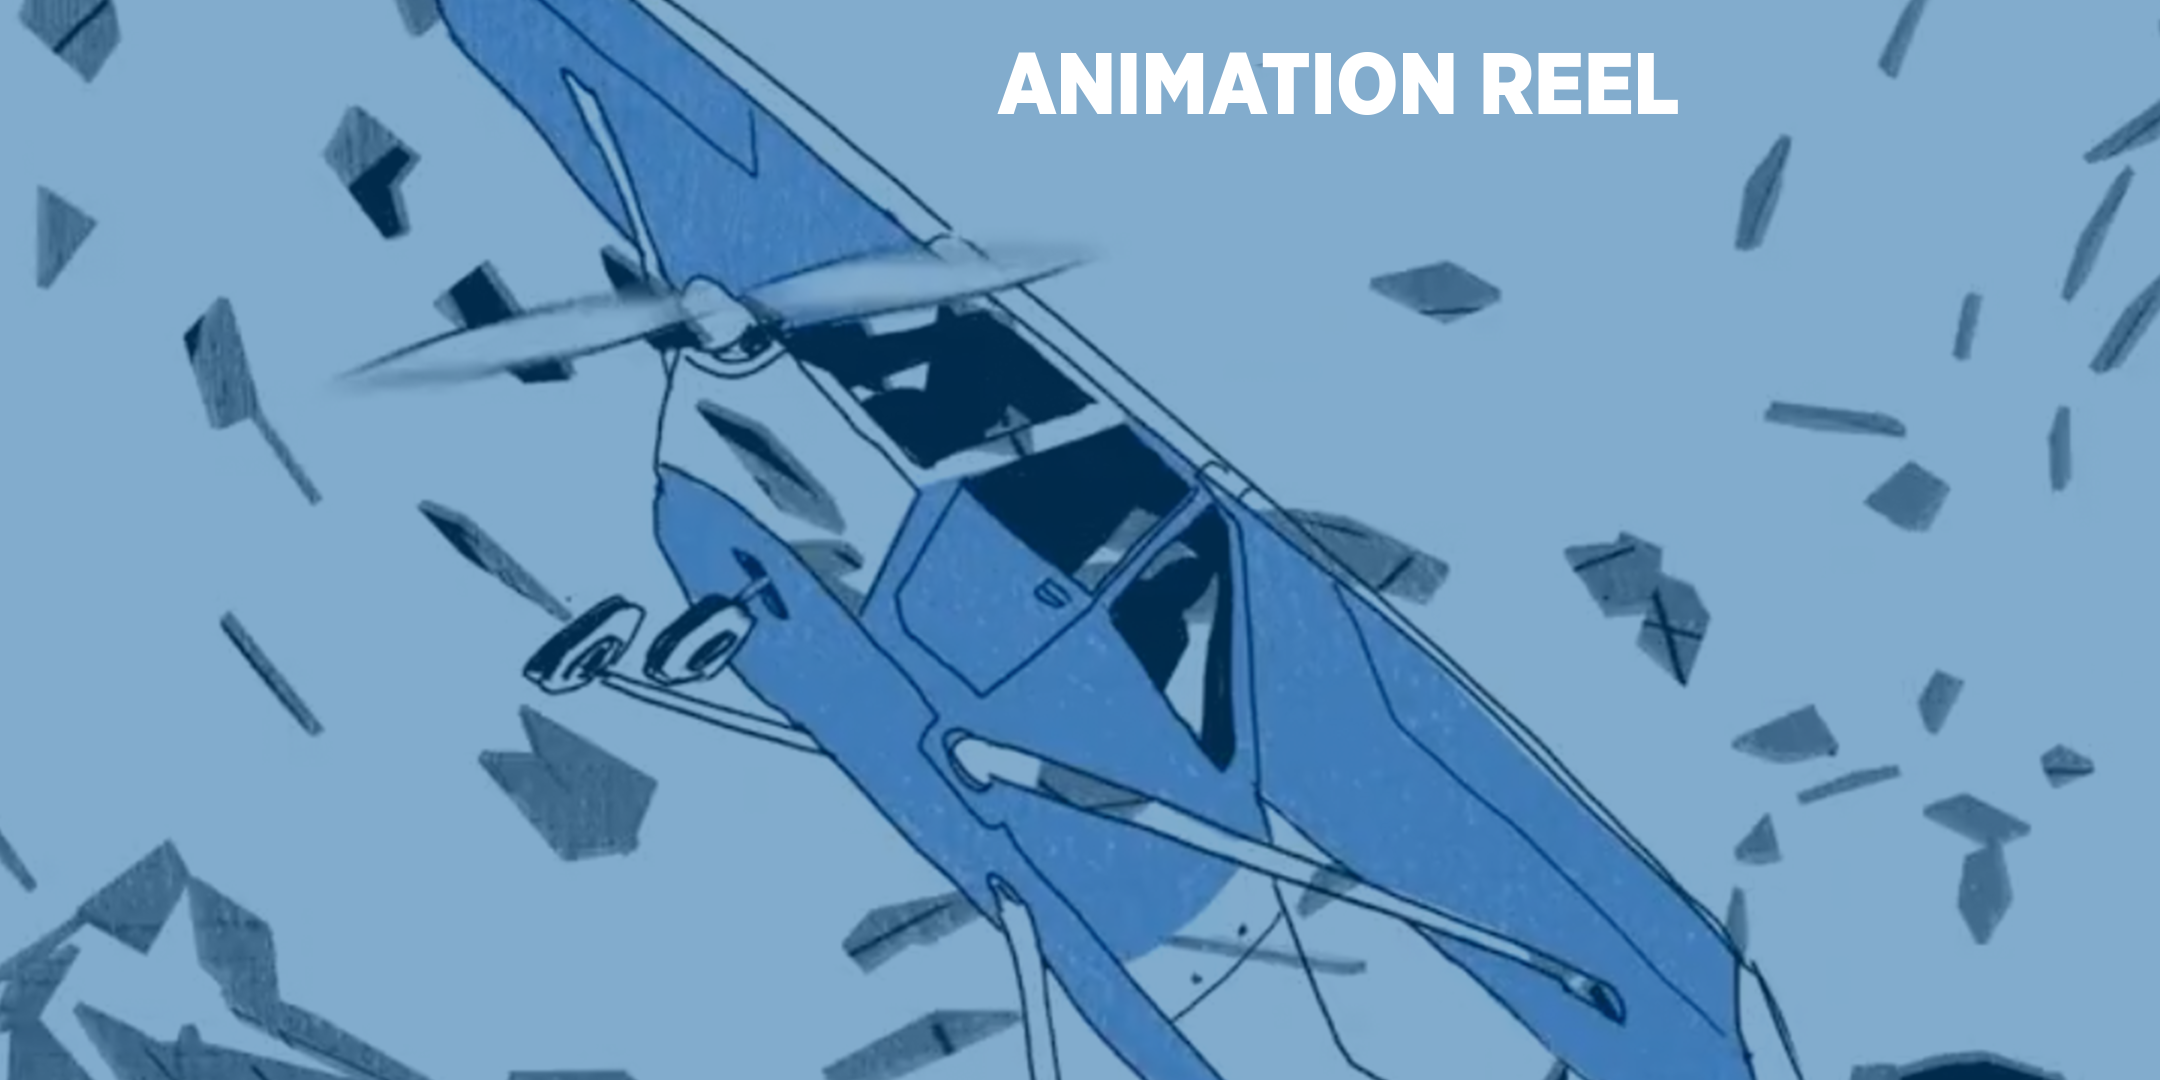 ANIMATION REEL STRETCHED